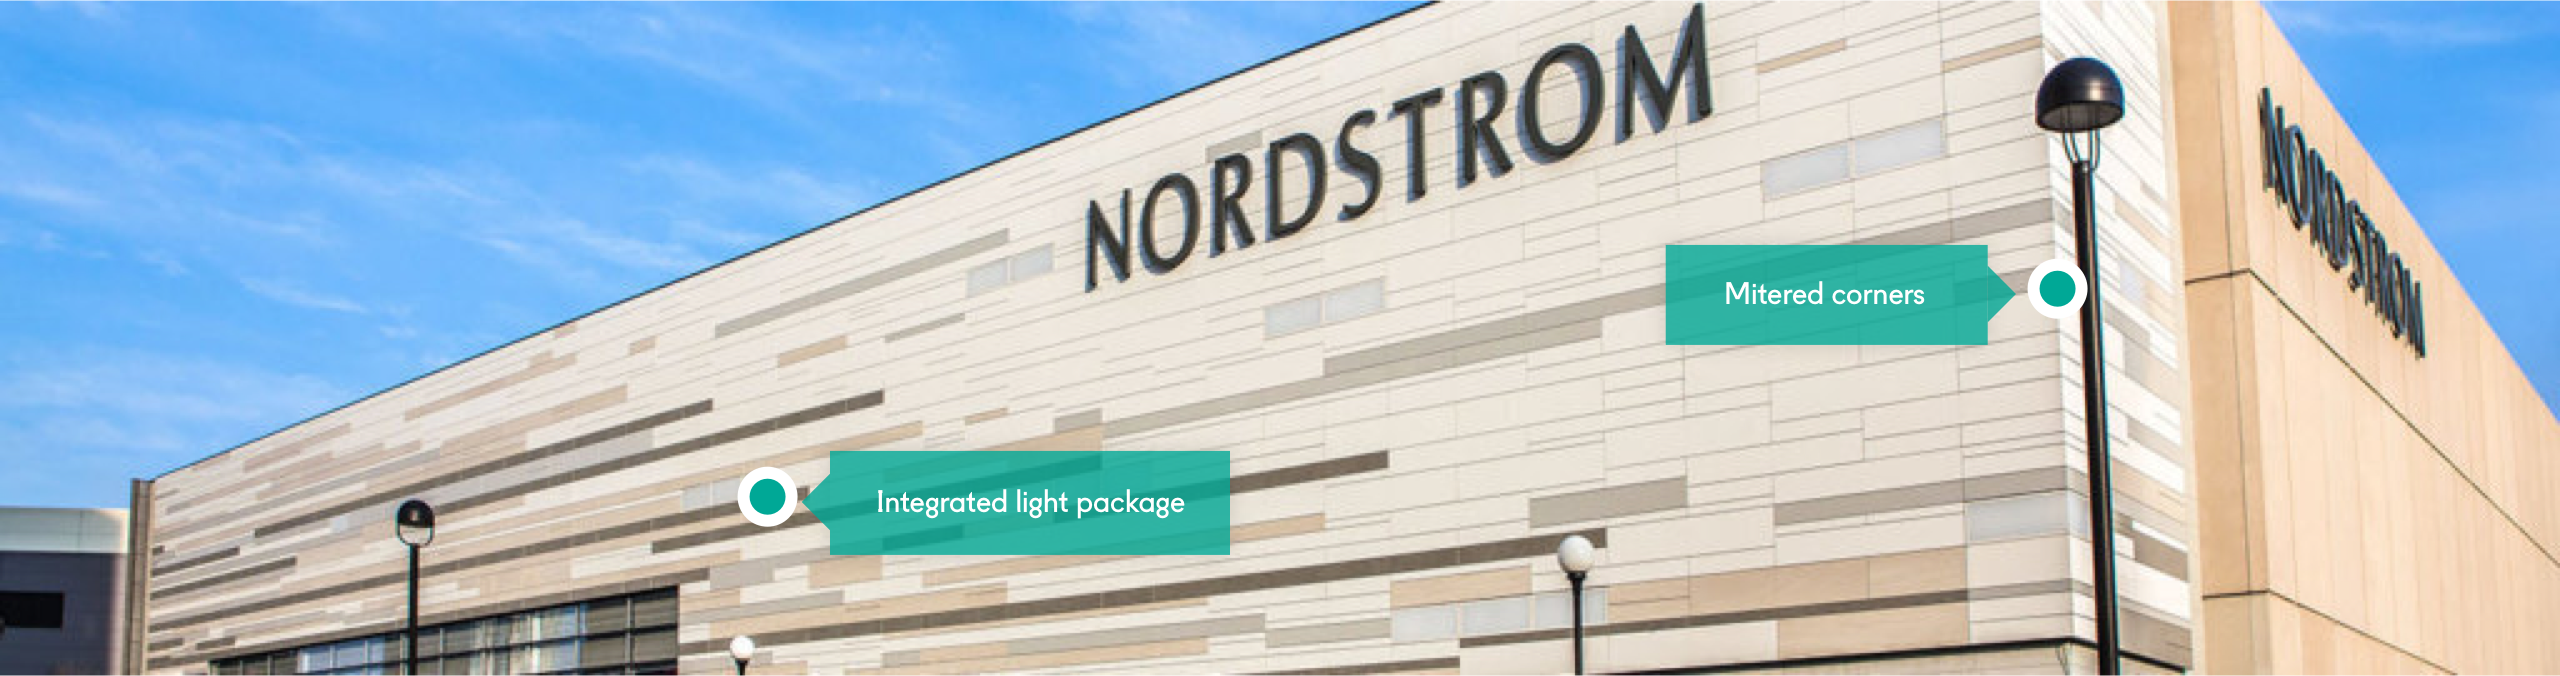 Nordstrom building showing integrated light packages and mitered corners